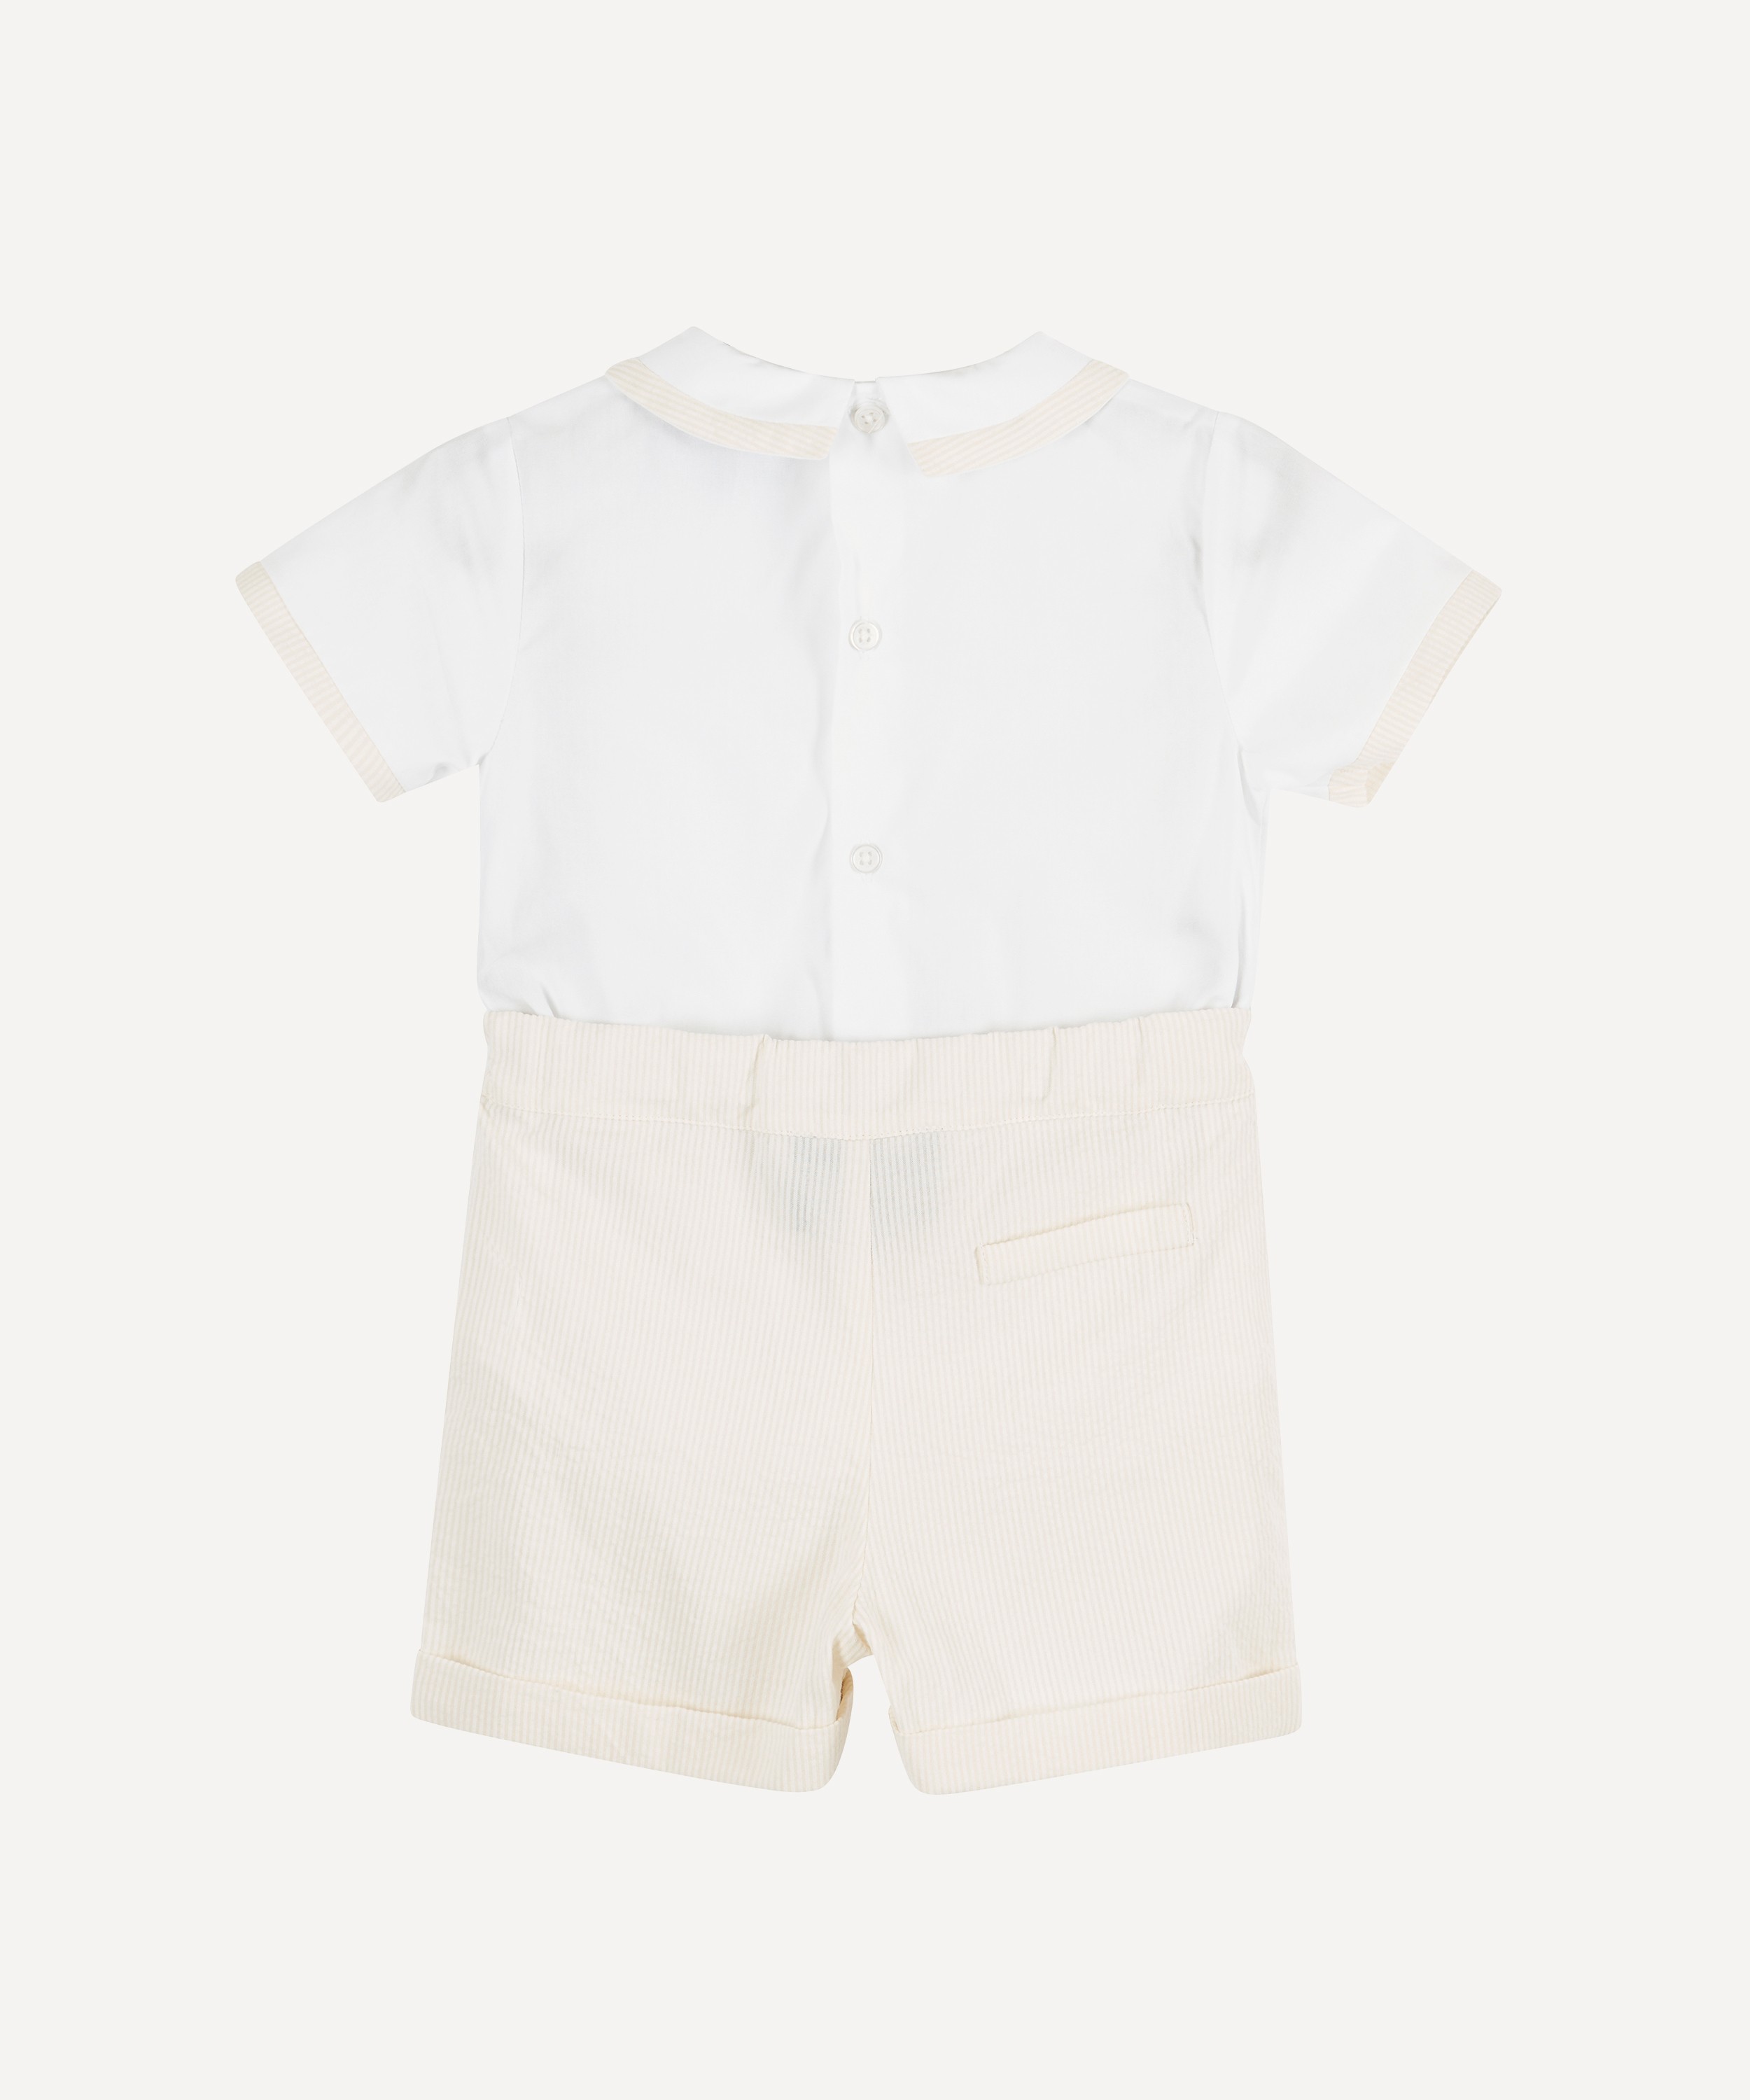 Trotters - Two Piece Rupert Set 2-7 Years image number 1